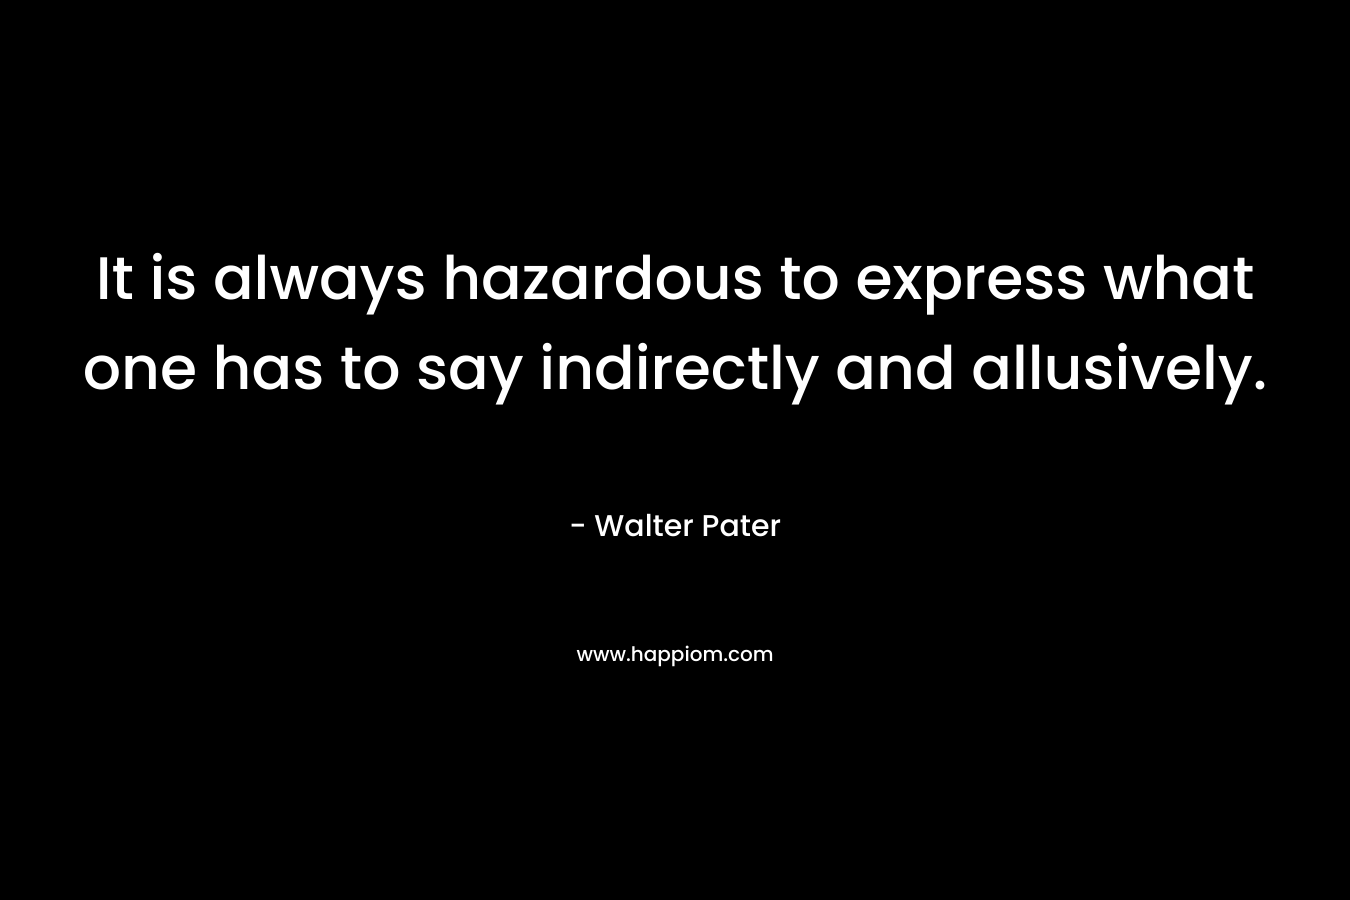 It is always hazardous to express what one has to say indirectly and allusively.